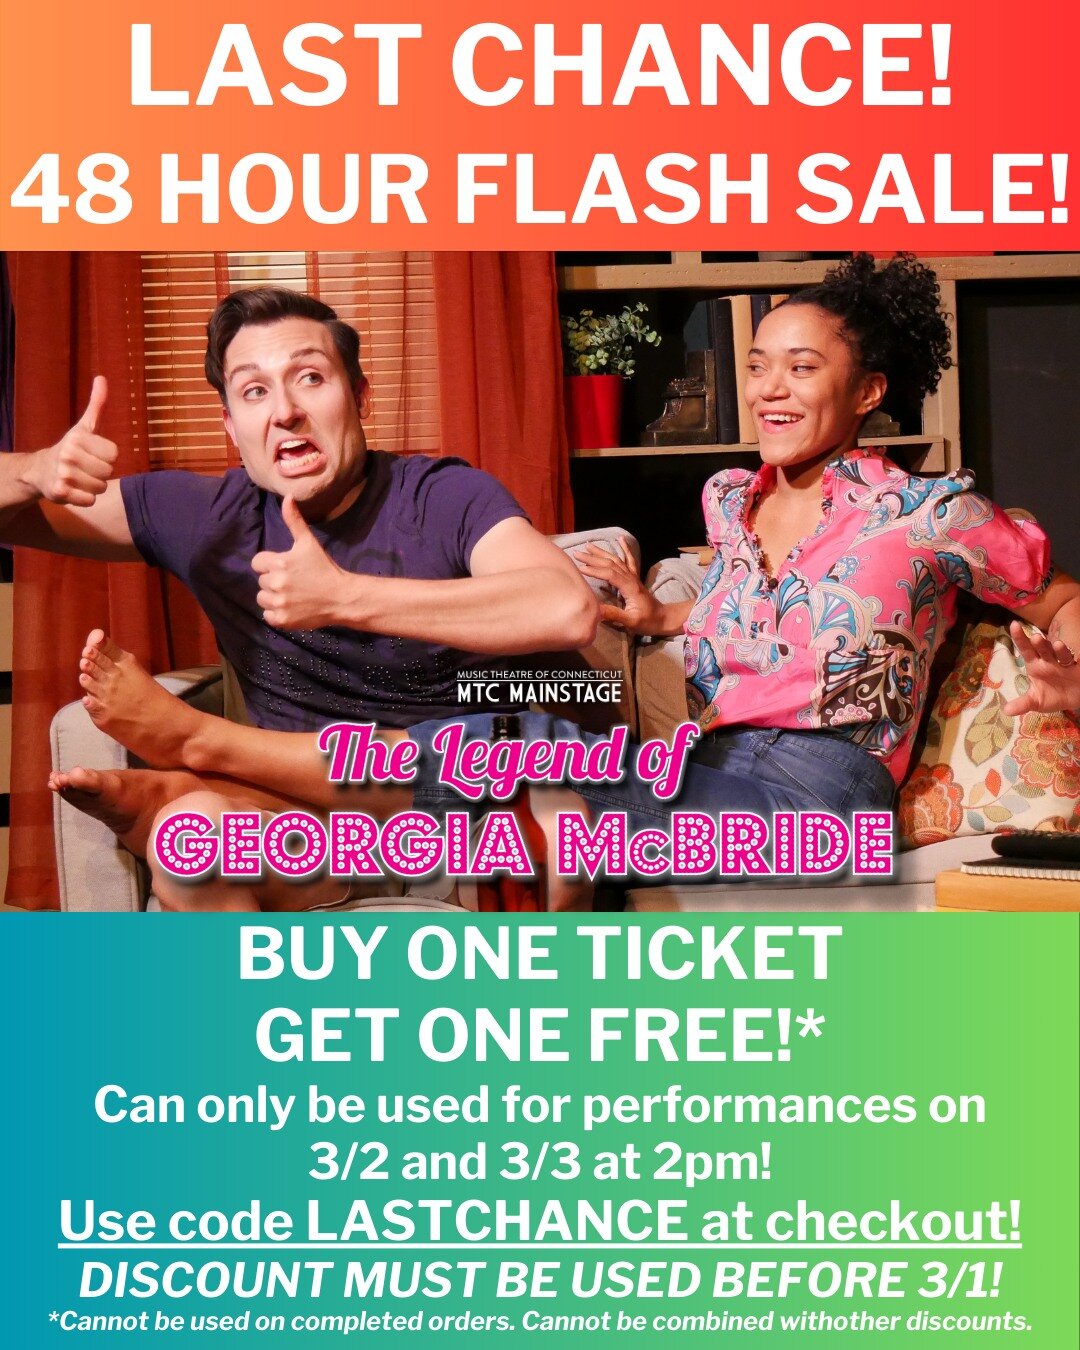 ⭐⚠DISCOUNT FOR 2PM PERFORMANCES!⚠⭐

YOUR LAST CHANCE TO SEE THE HILARIOUS GEORGIA MCBRIDE! Get two tickets for the price of one for 3/2 and 3/3 2PM performances! Discount code LASTCHANCE is only available through 2/29, so don't delay!*

📅 The Legend